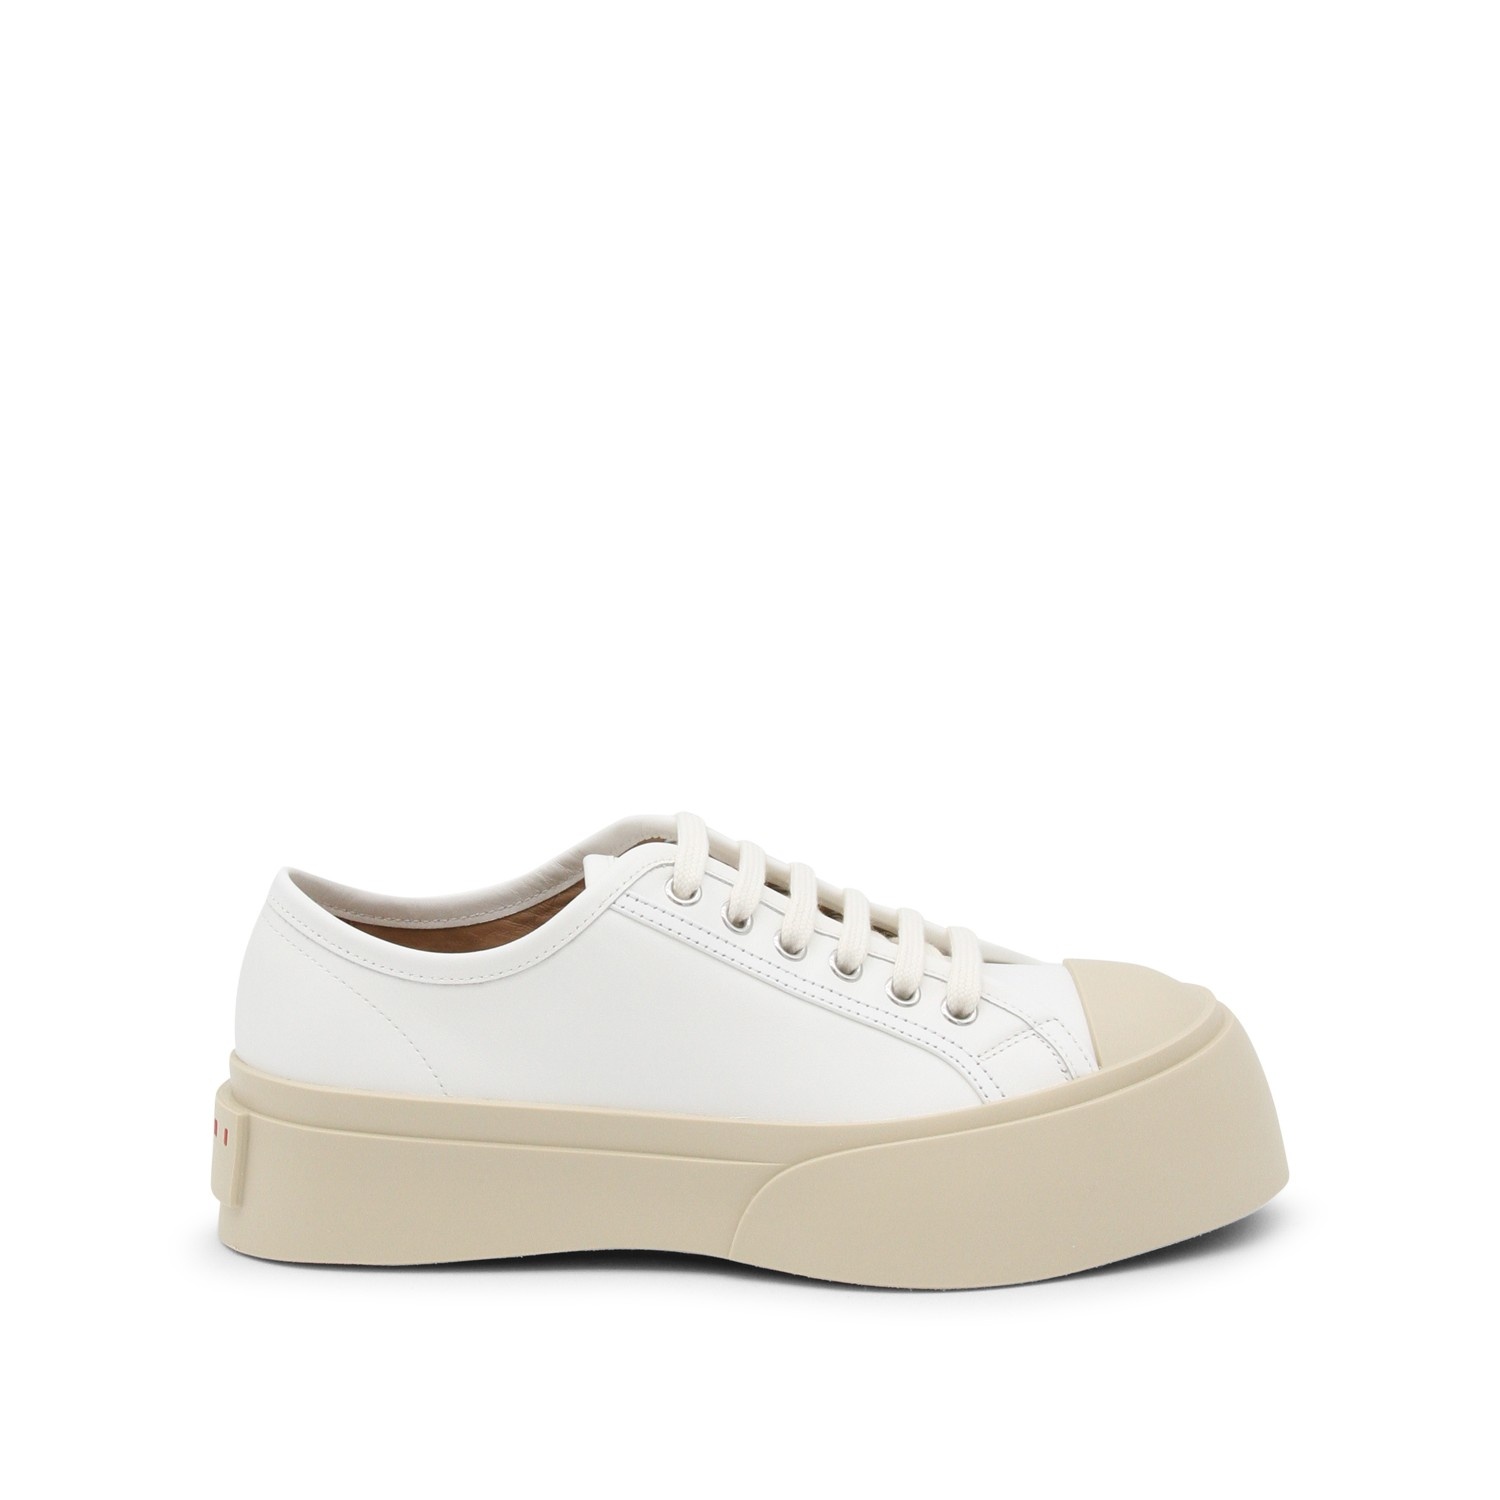 WHITE LEATHER PABLO SNEAKERS - 1